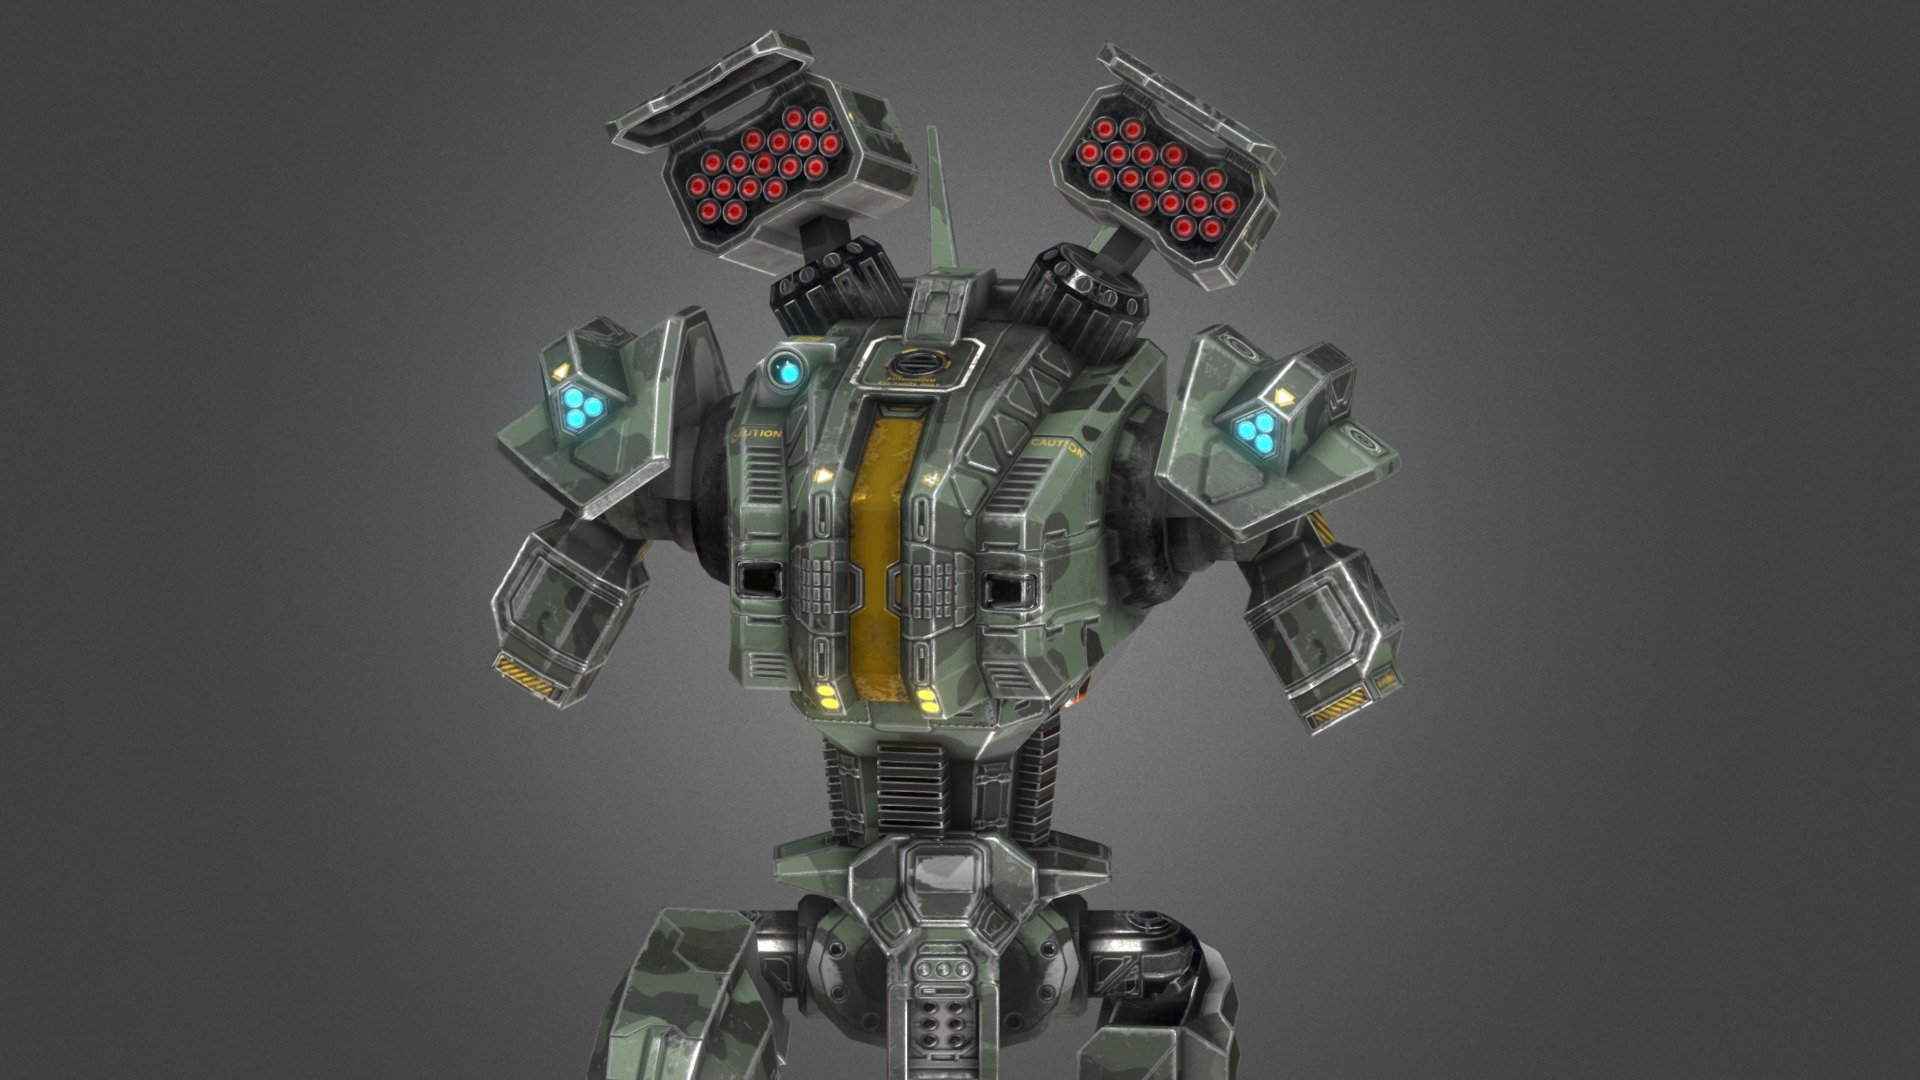 Havoc is one of my low-poly mech models designed for mobile game. It contains 2 moduler rifles and 2 lasers with high resolution diffusemap, normalmap,roughnessmap, emissivemap,metallicmap and specularmaps. Model is rigged and has walking animation embedded 3d model